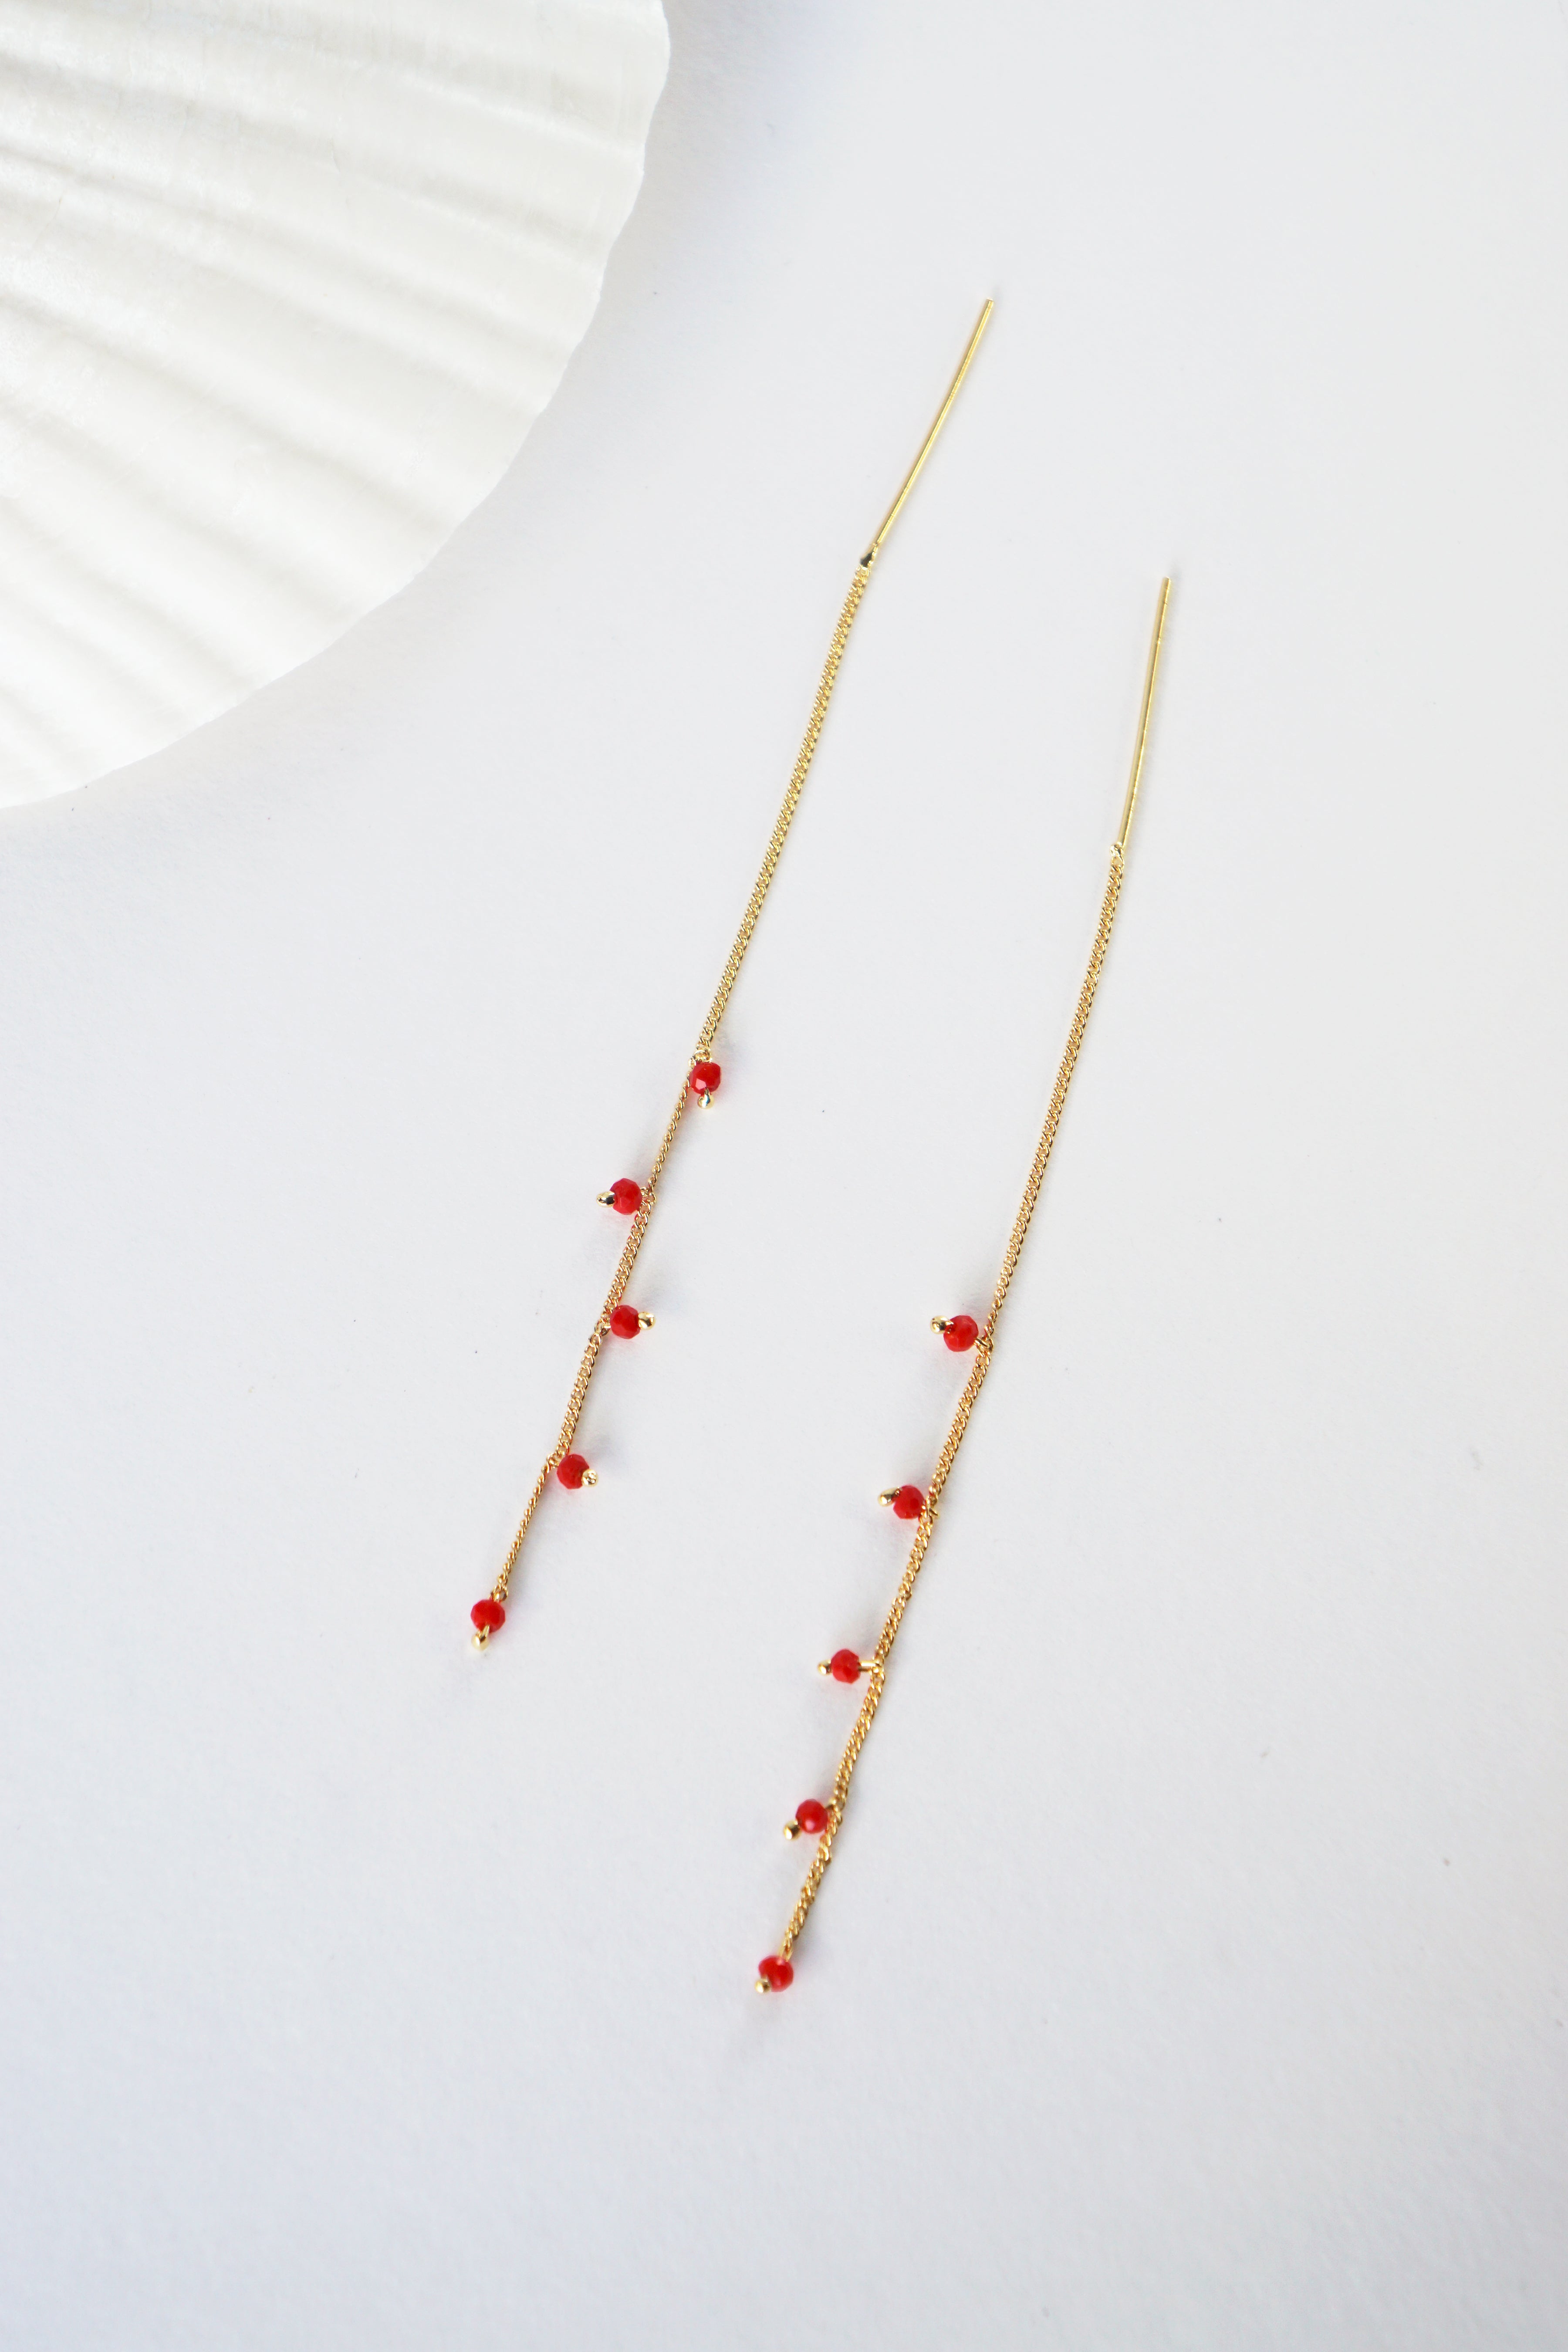 Wisteria Ear Threaders in Gold - Red